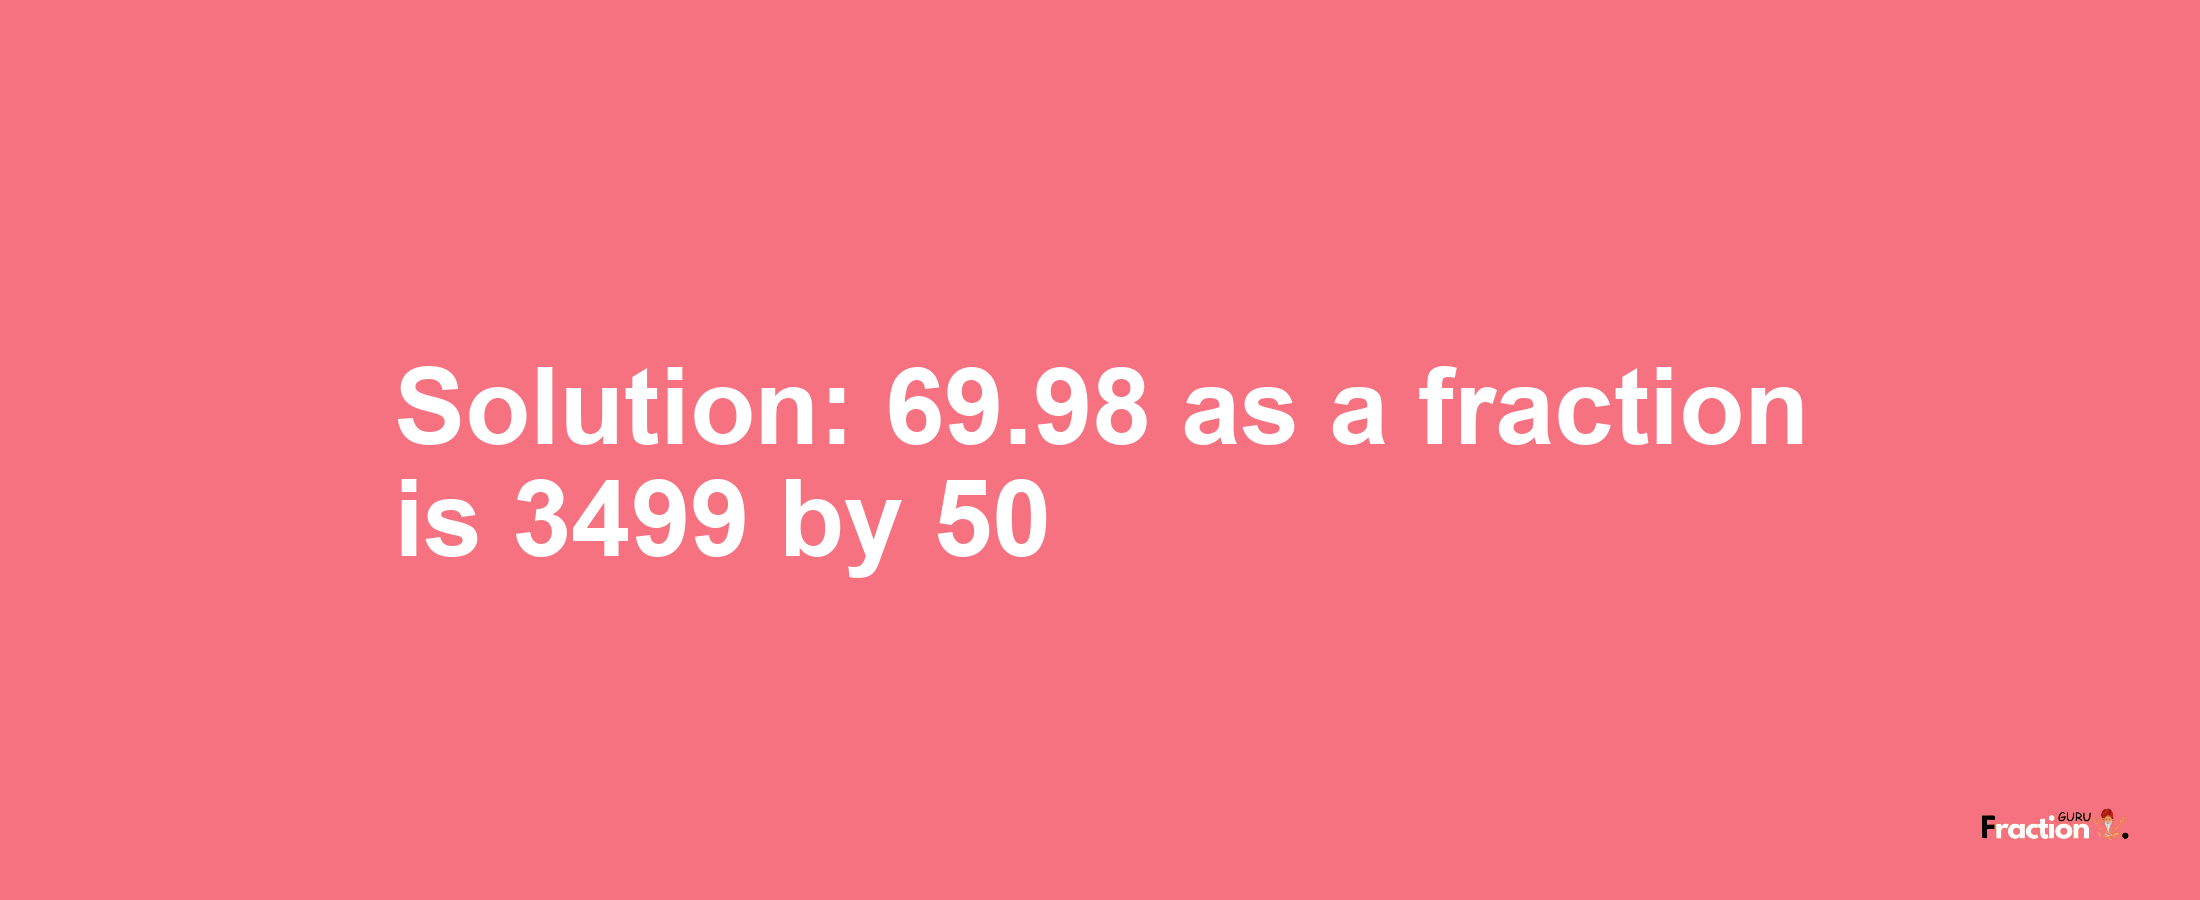 Solution:69.98 as a fraction is 3499/50